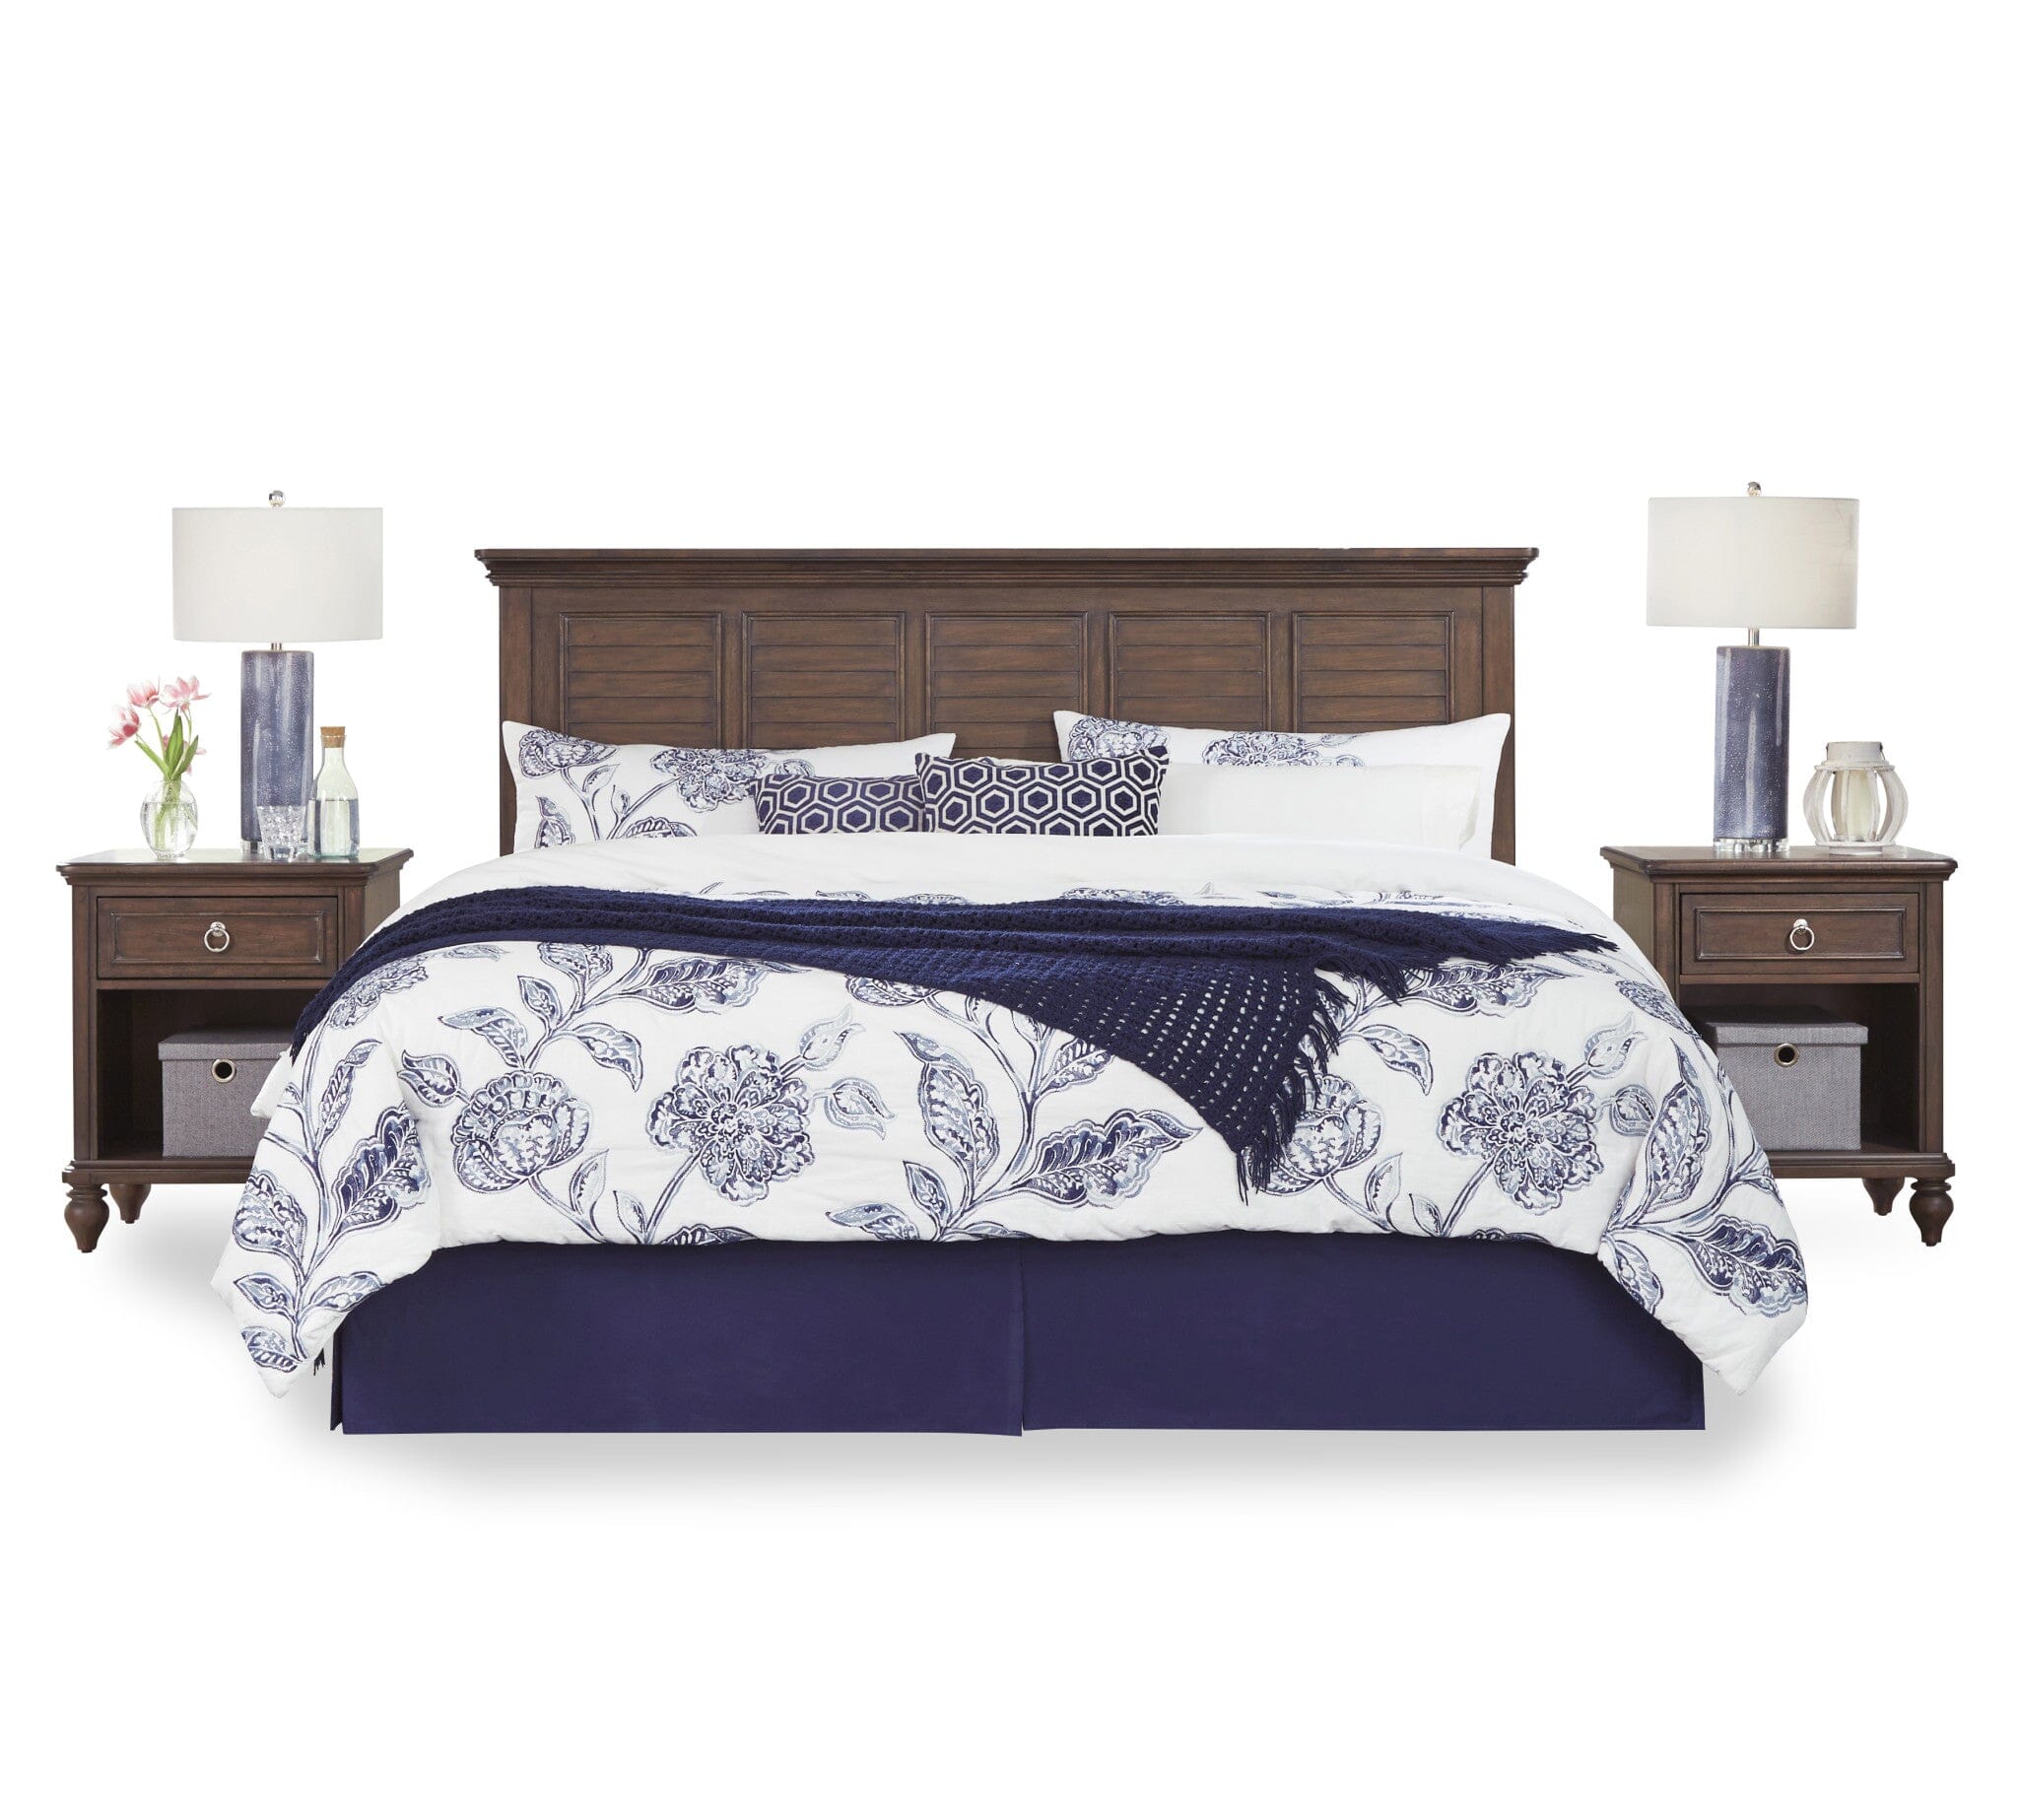 Coastal King Headboard and Two Nightstands By Southport King Bed Set Southport